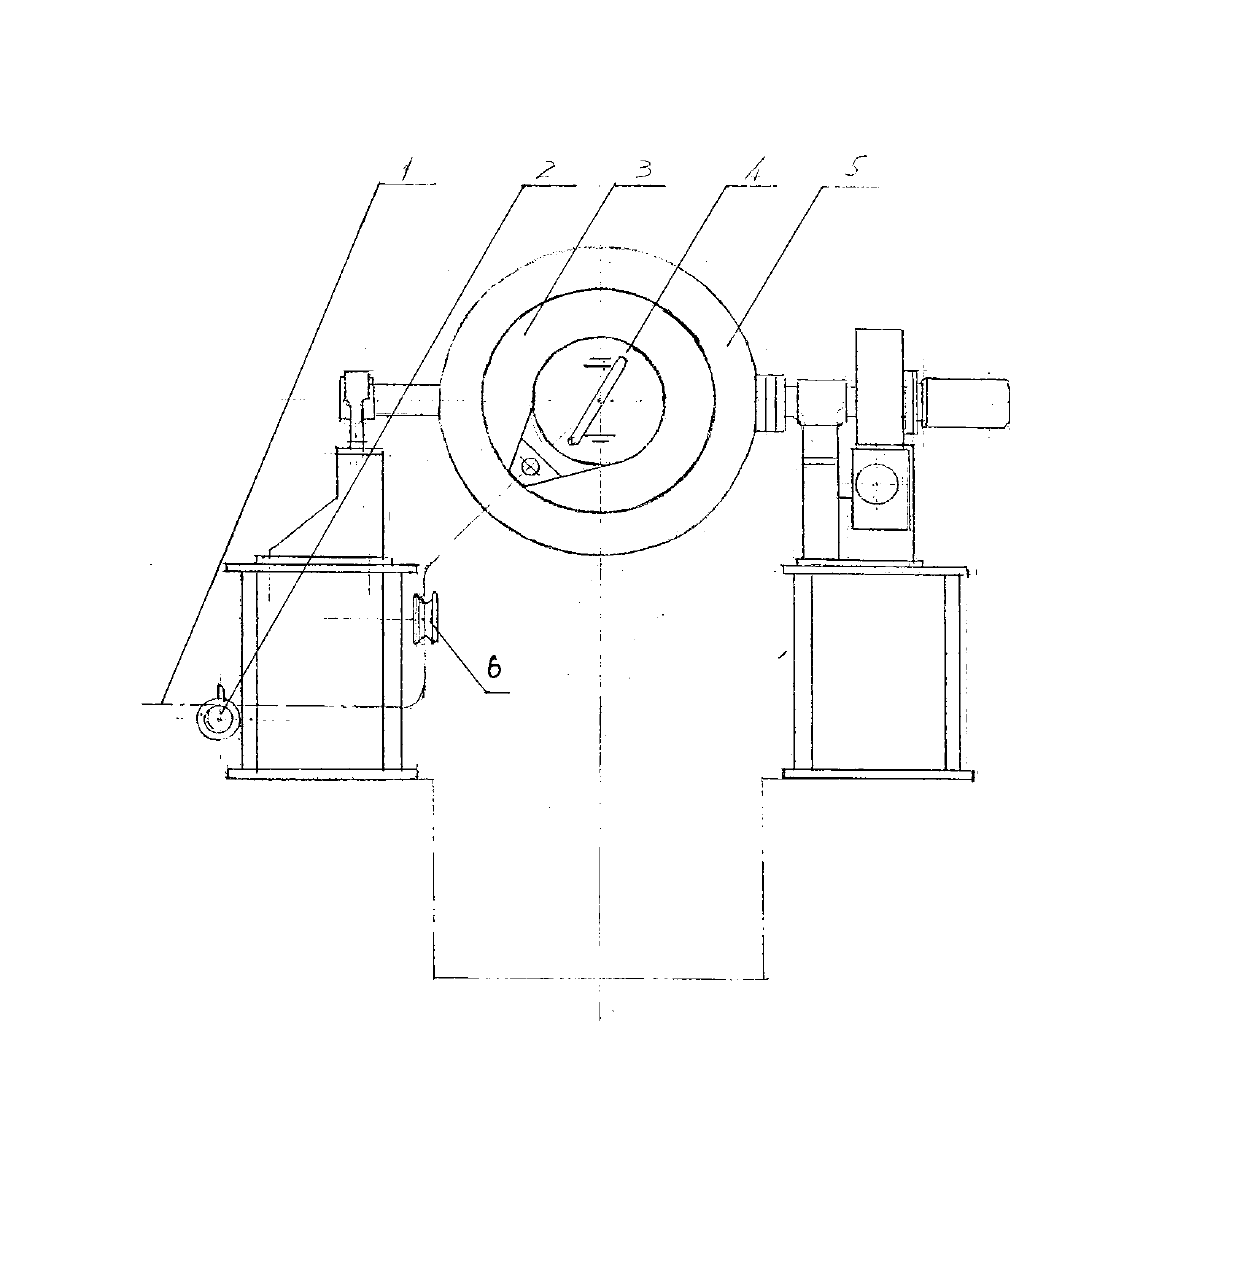 Two-phase flow integrated quartz resistance furnace